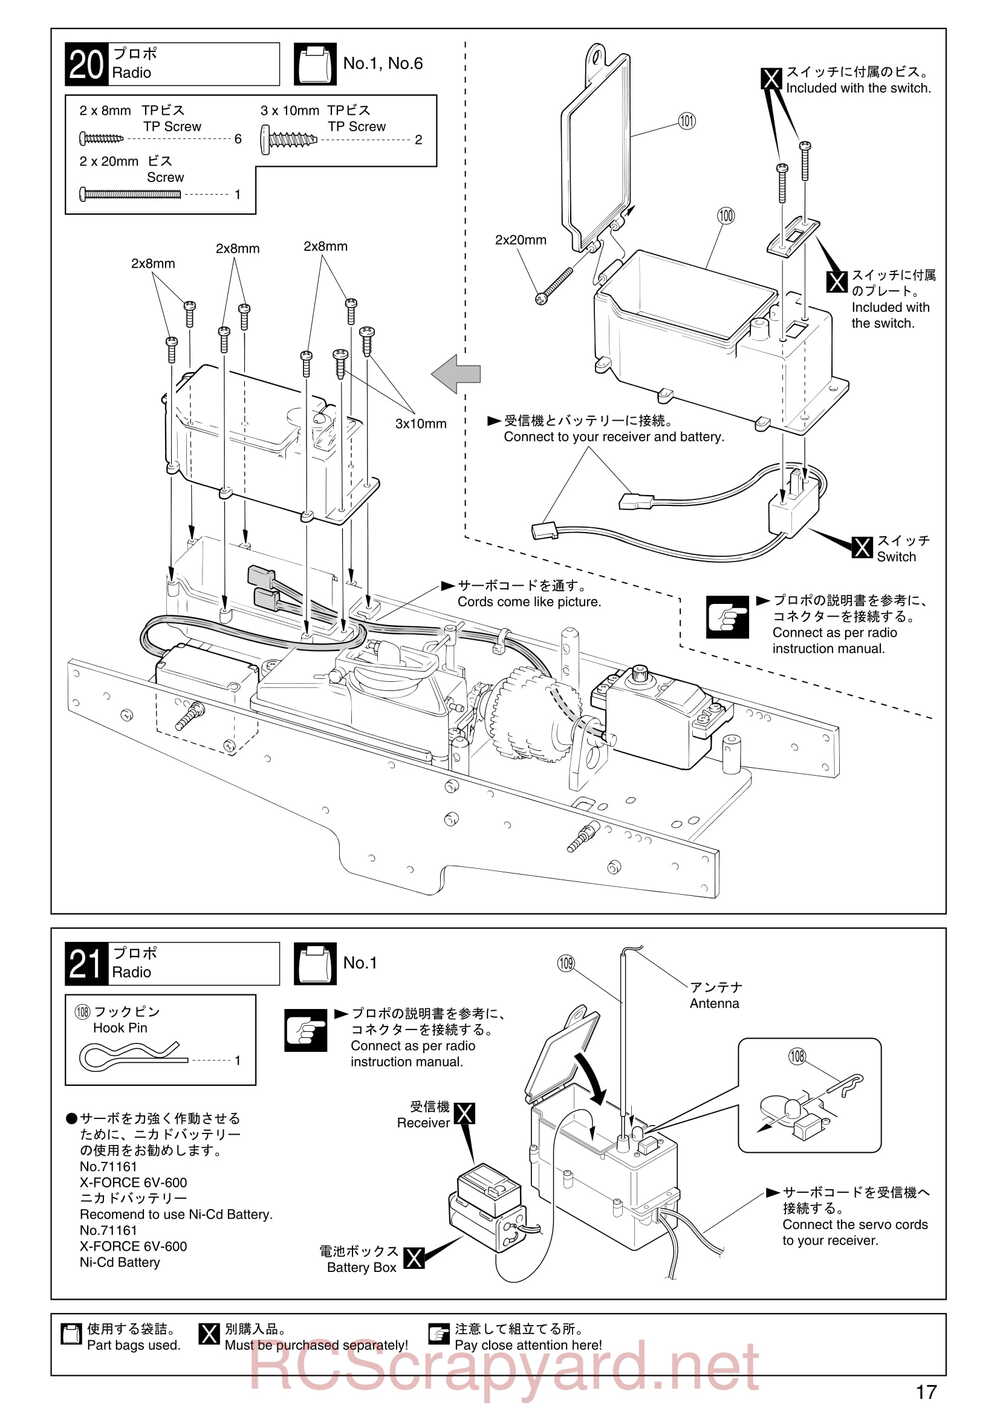 Kyosho - 31224 - Mad-Armour - Manual - Page 17